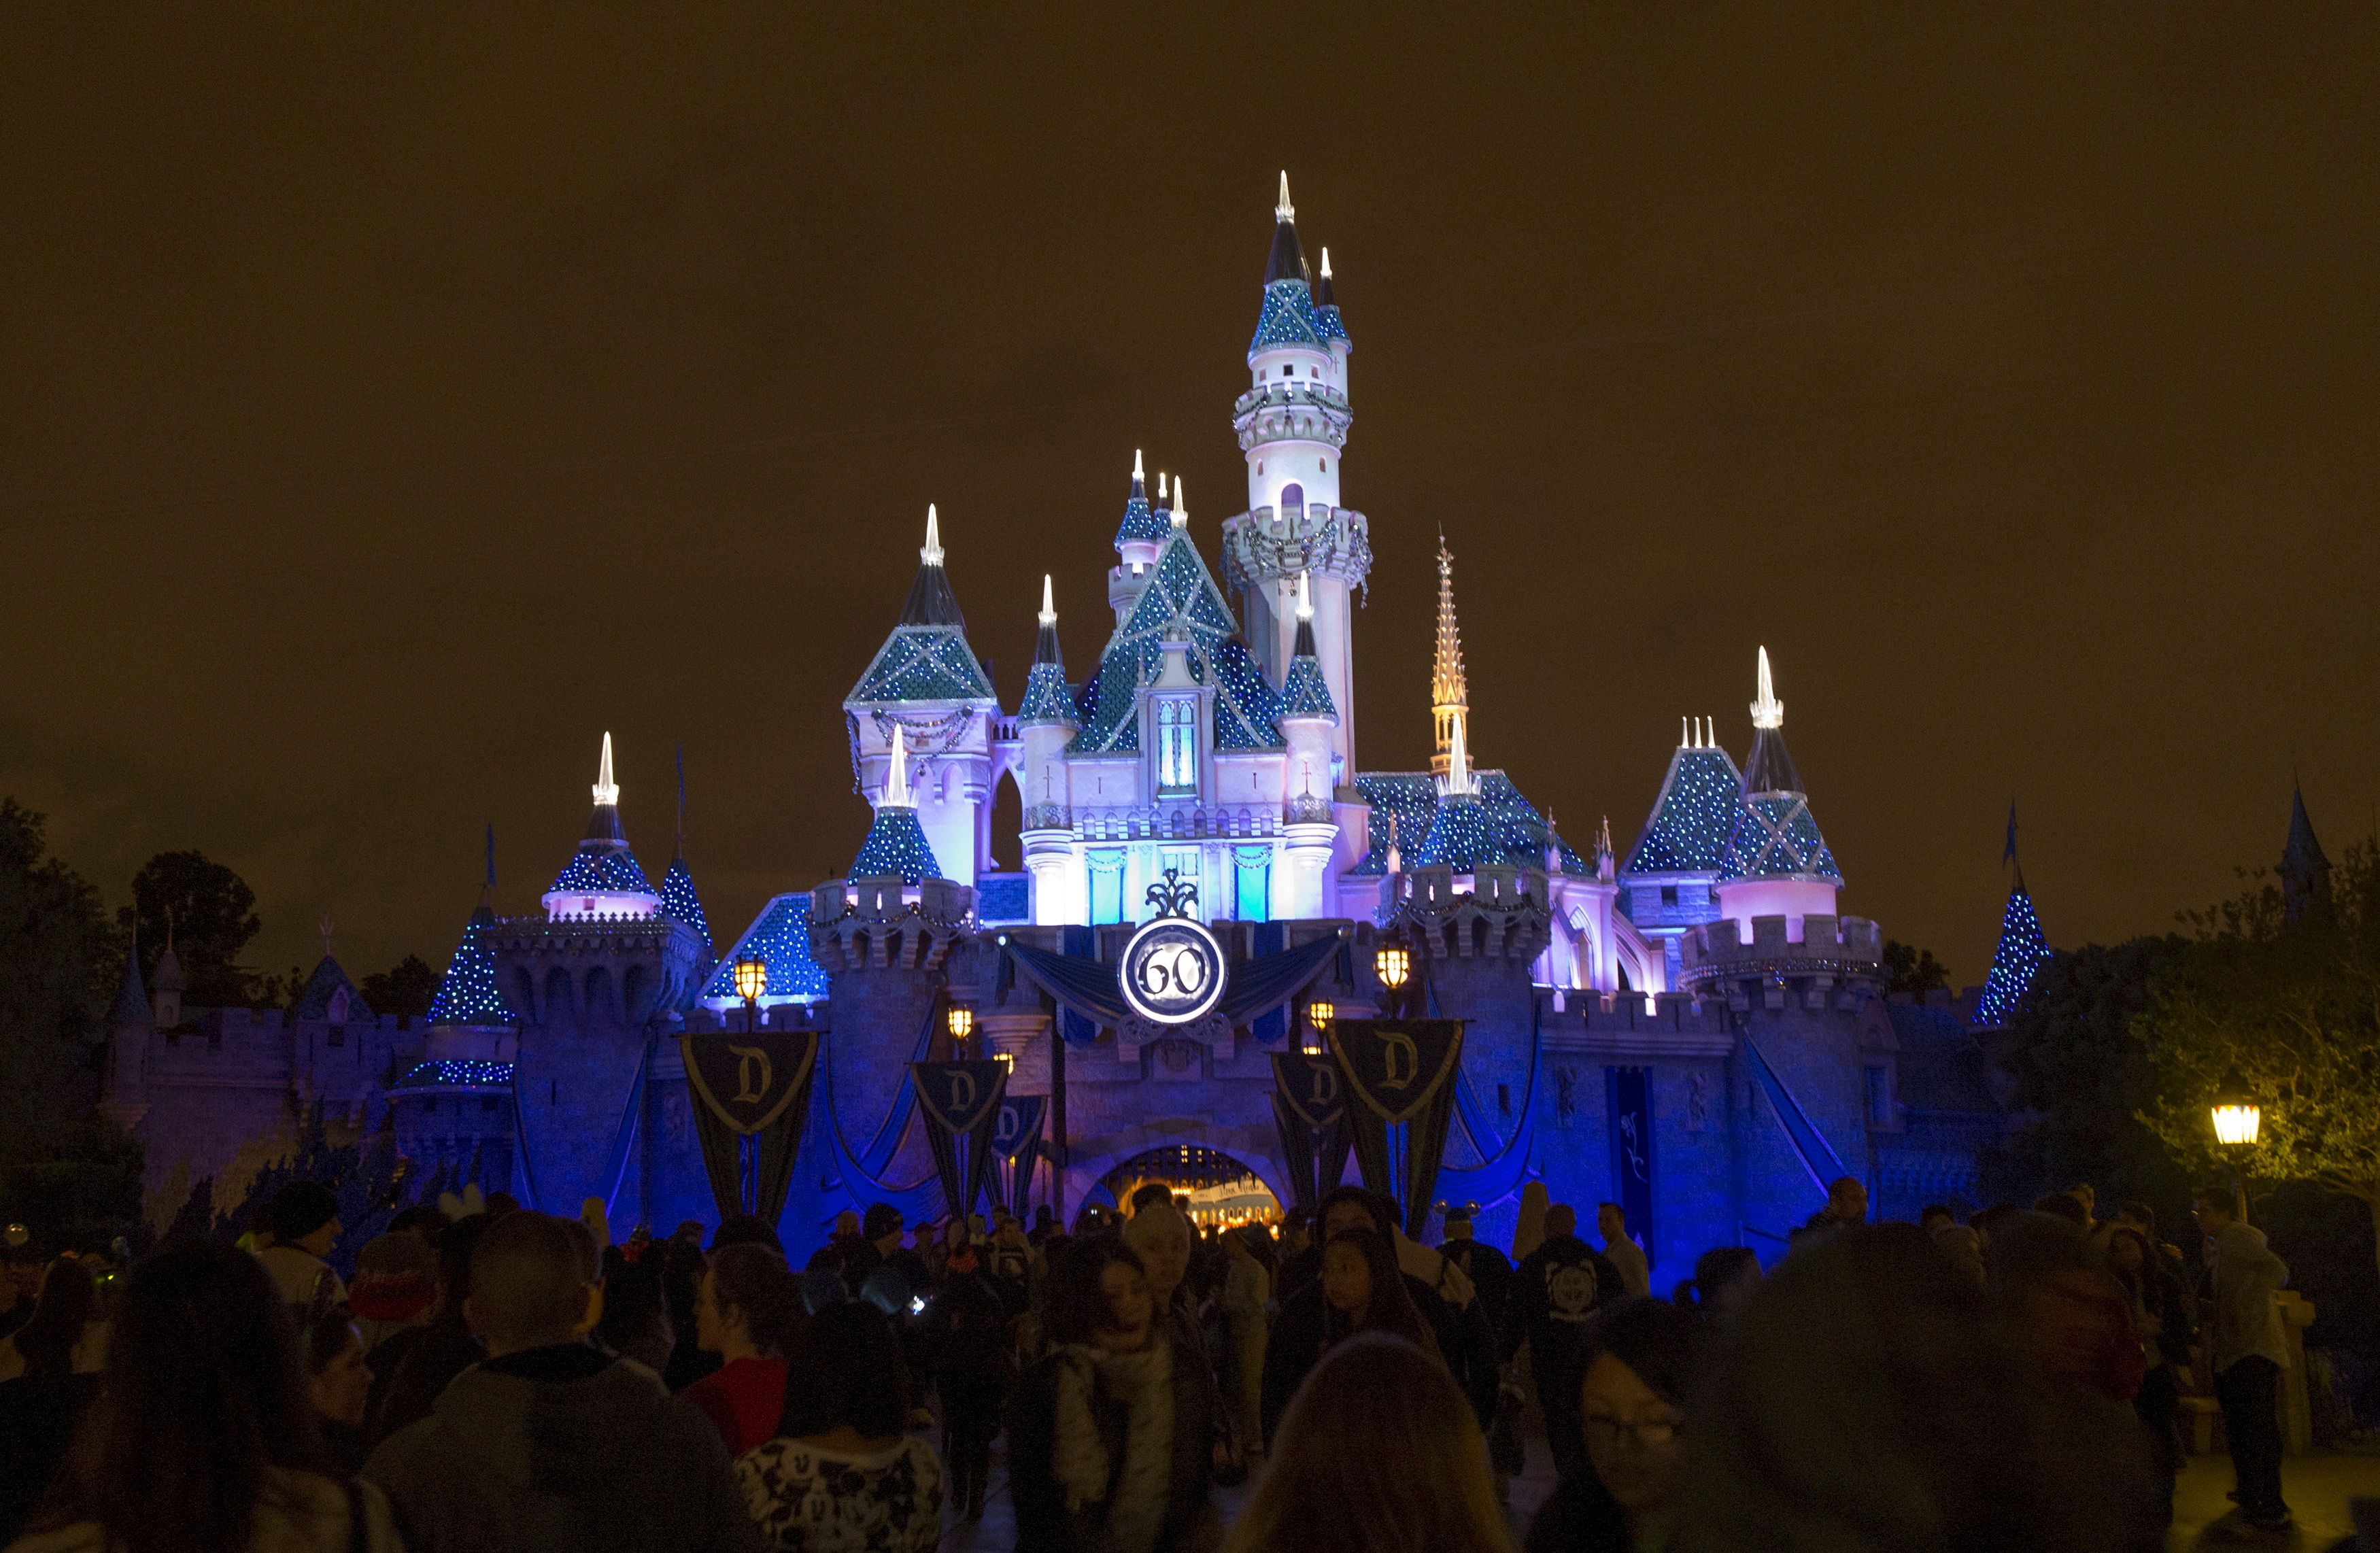 Sleeping Beauty's Castle is pictured during Disneyland's Diamond Celebration in Anaheim